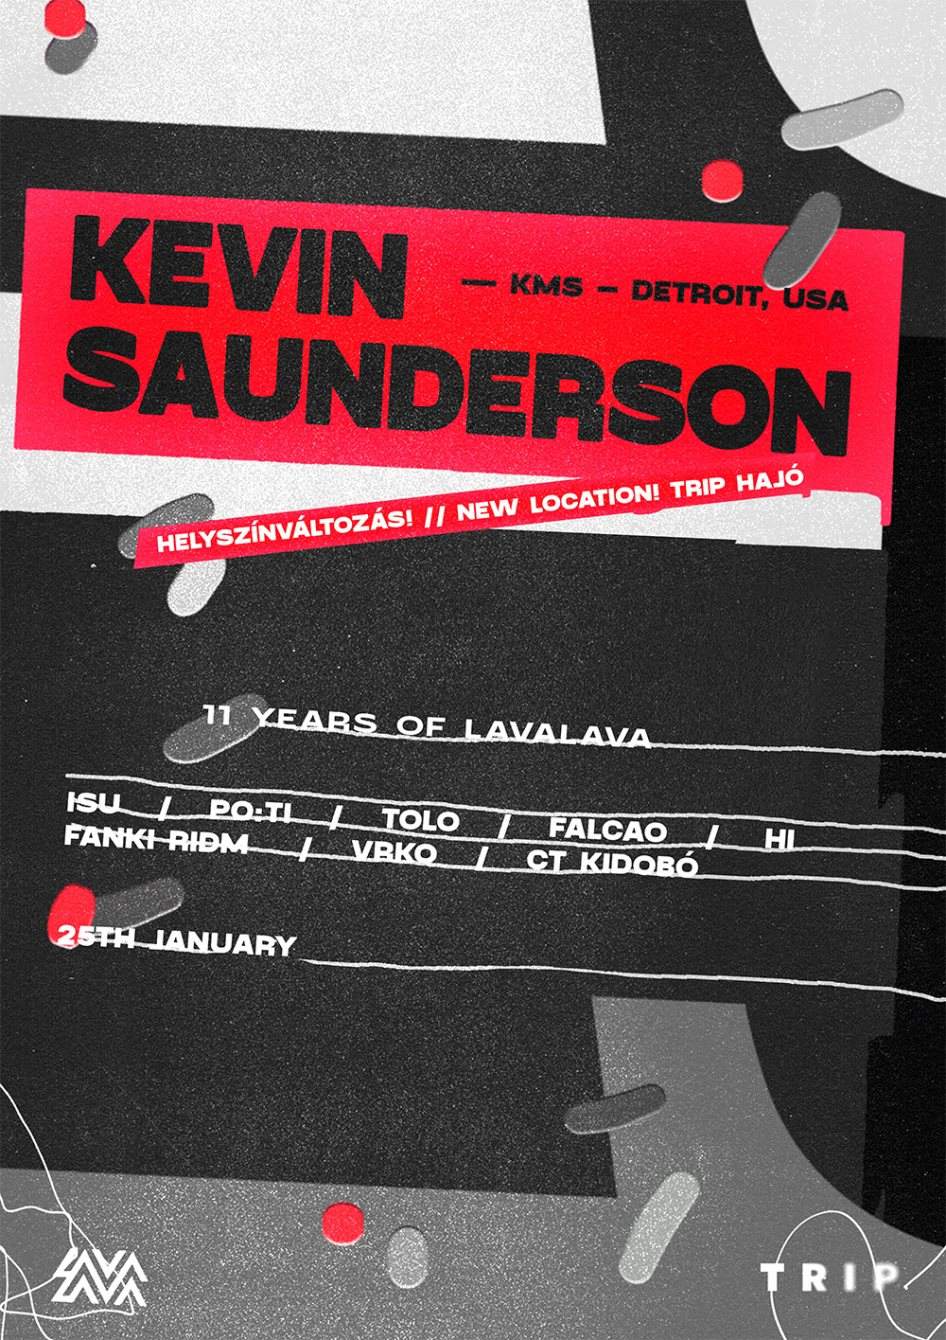 11 Years of LavaLava with Kevin Saunderson - フライヤー表